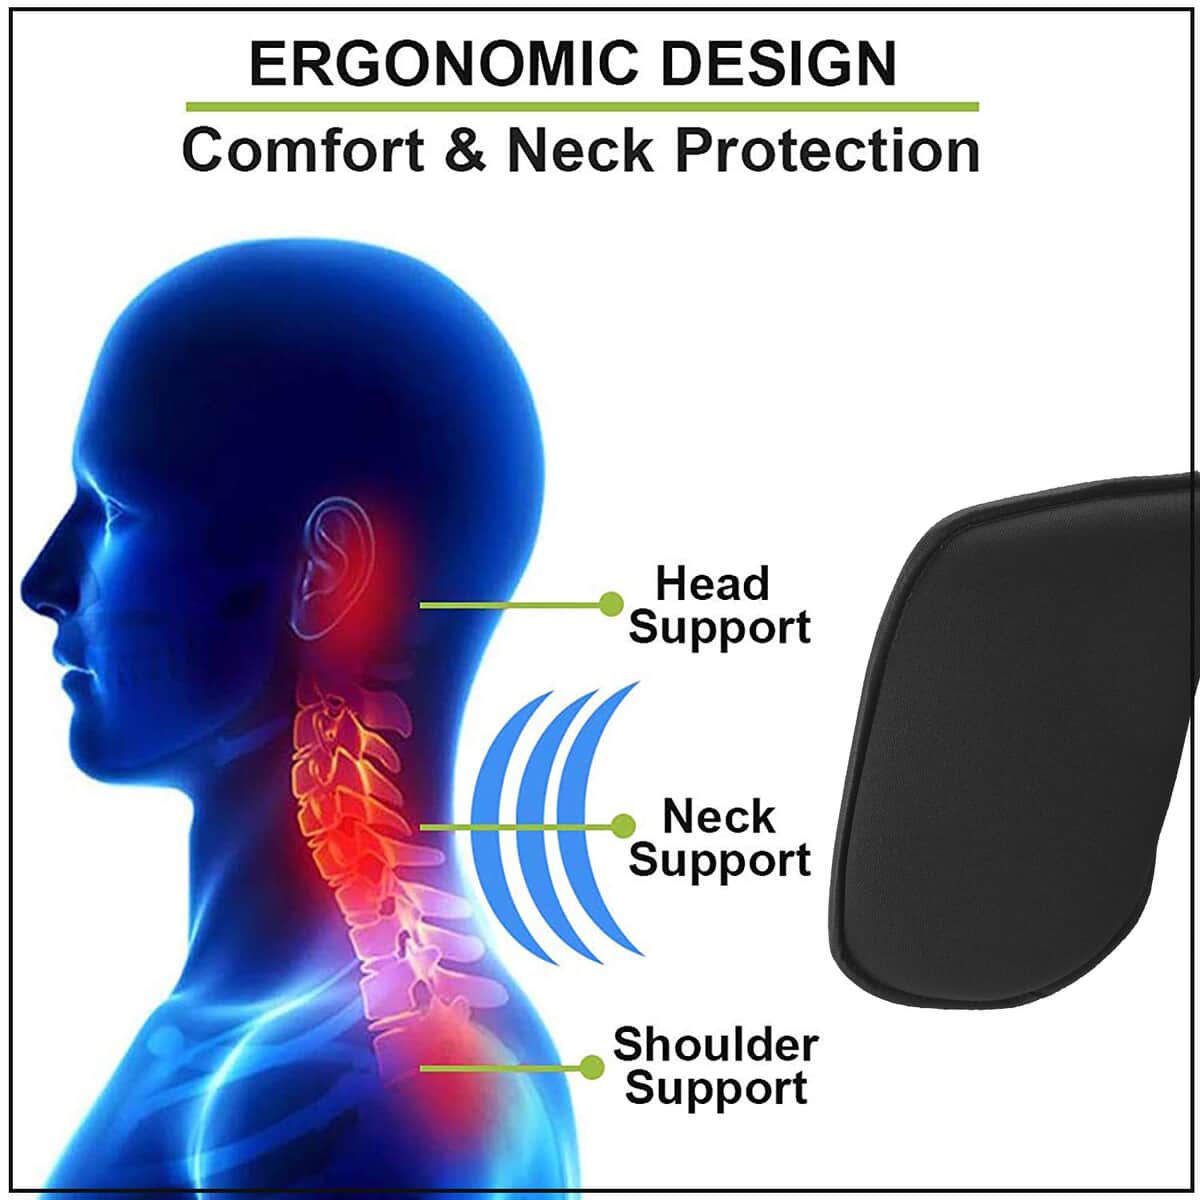 Black Car Sweat-resistant Sleeping Headrest with Side Wings, 180 Degree Adjustable Neck Rest Pillow, Soft Memory Foam, Mountable on Car Seat image number 3